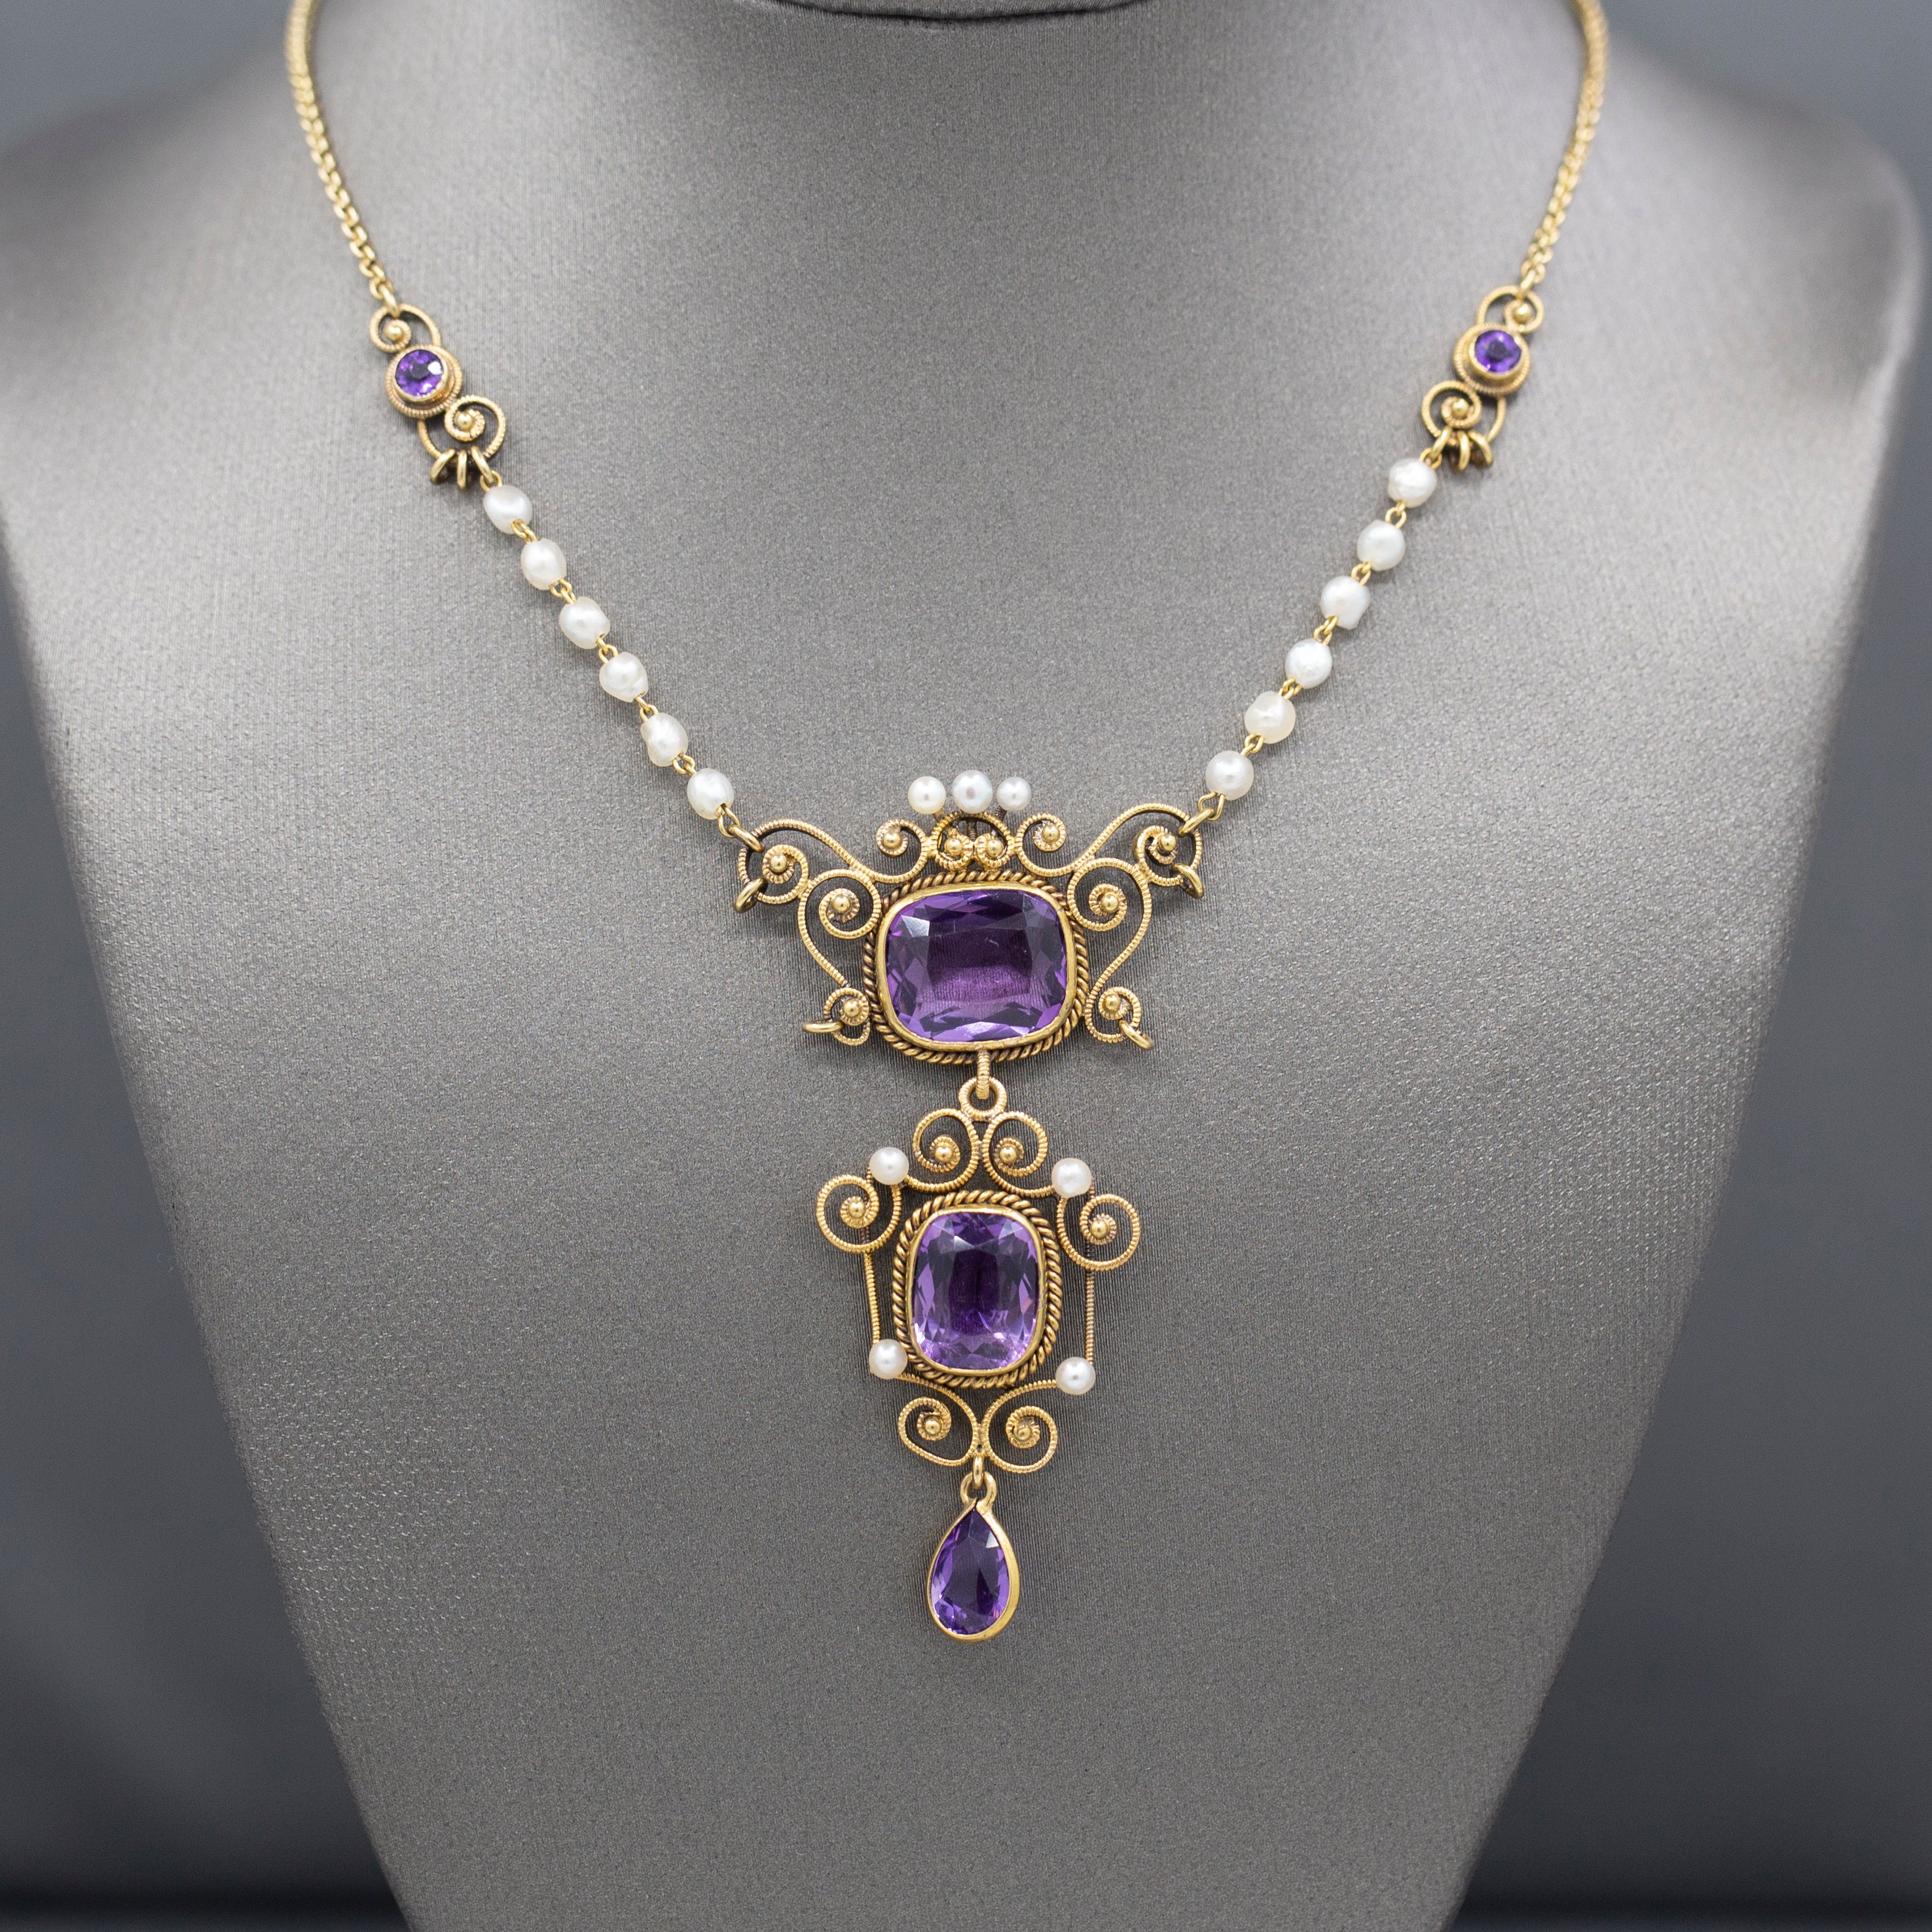 Antique Victorian Amethyst and Seed Pearl PendaAntique Victorian Amethyst and Seed Pearl Pendant Necklace in 14k Yellow Goldnt Necklace in 14k Yellow Gold